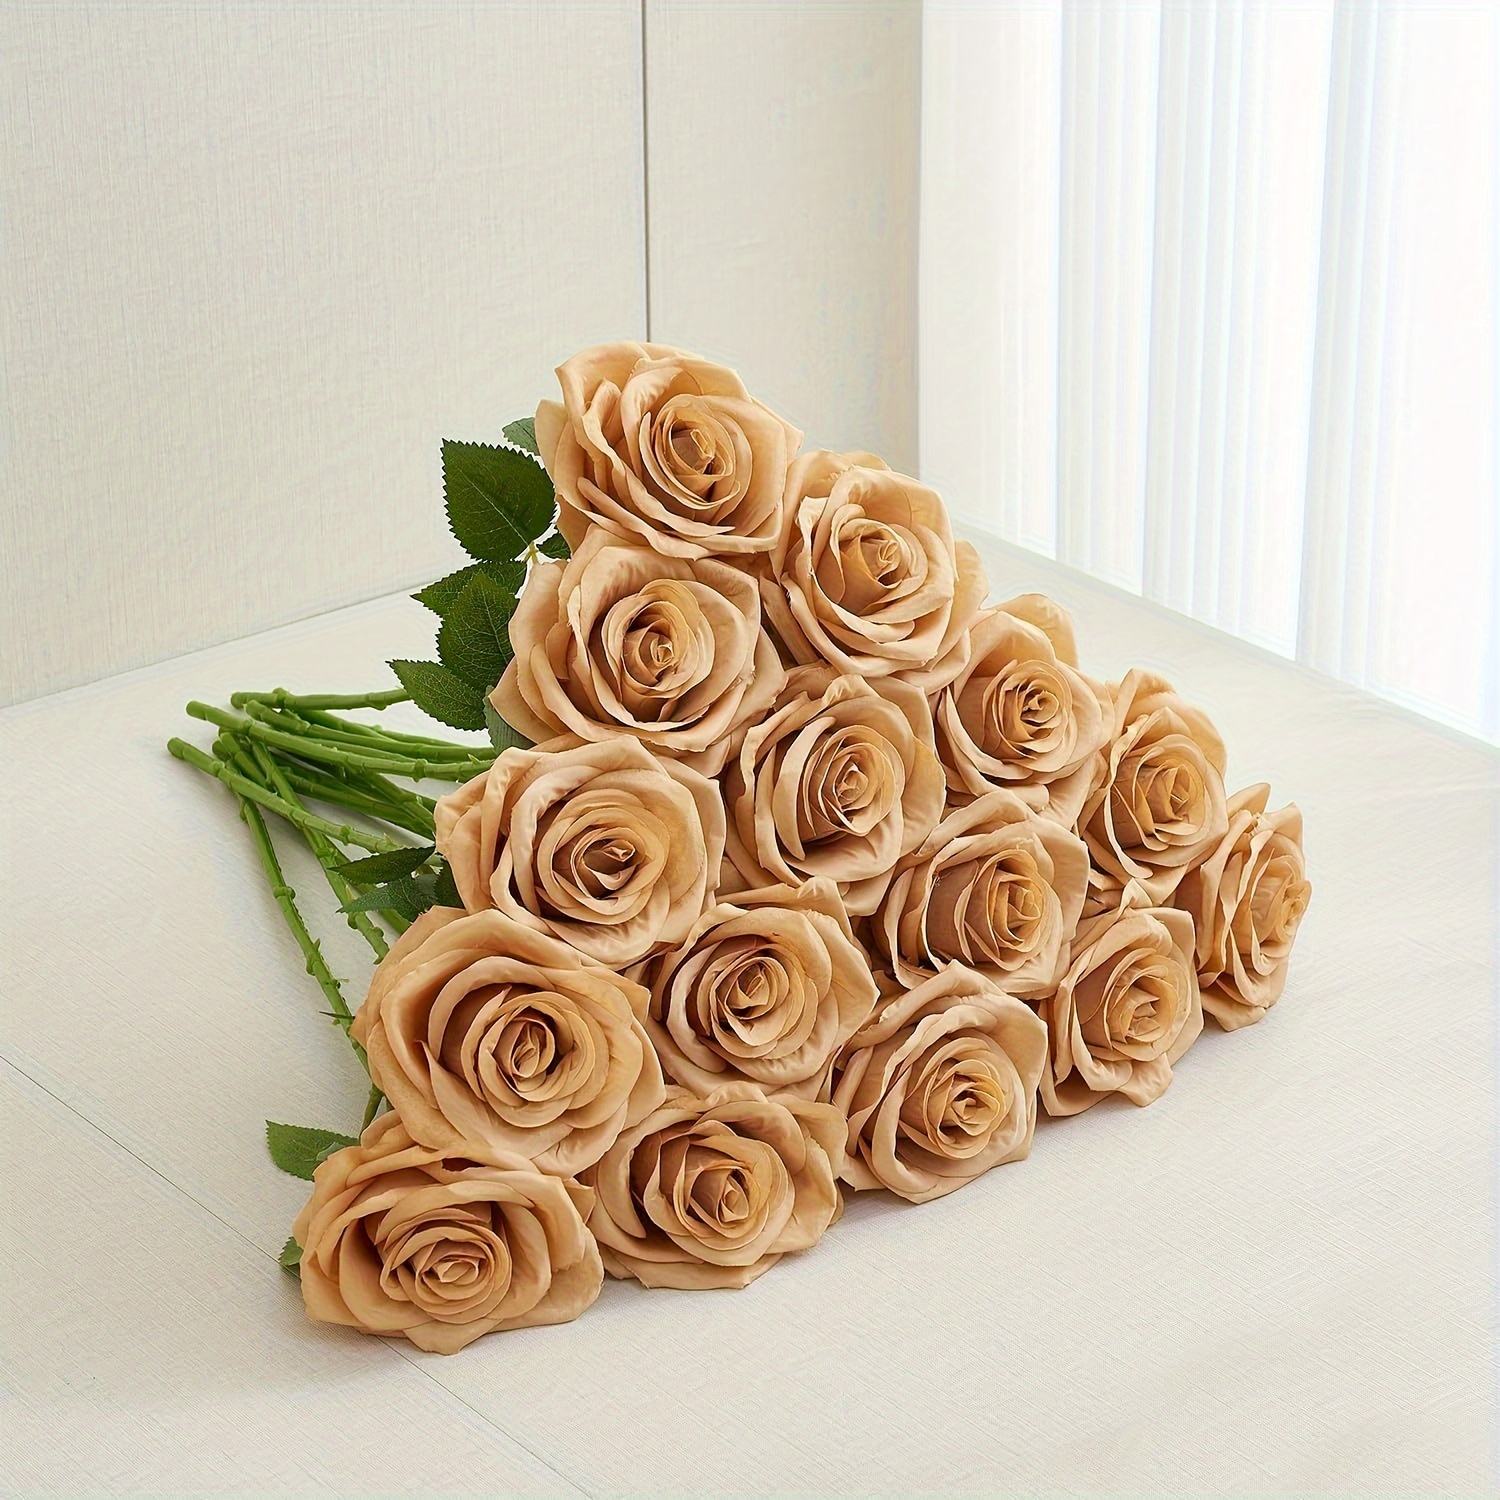 

6-piece Lifelike Silk Roses With Long Stems - Perfect For Wedding Centerpieces, Party Decor & Home Accents